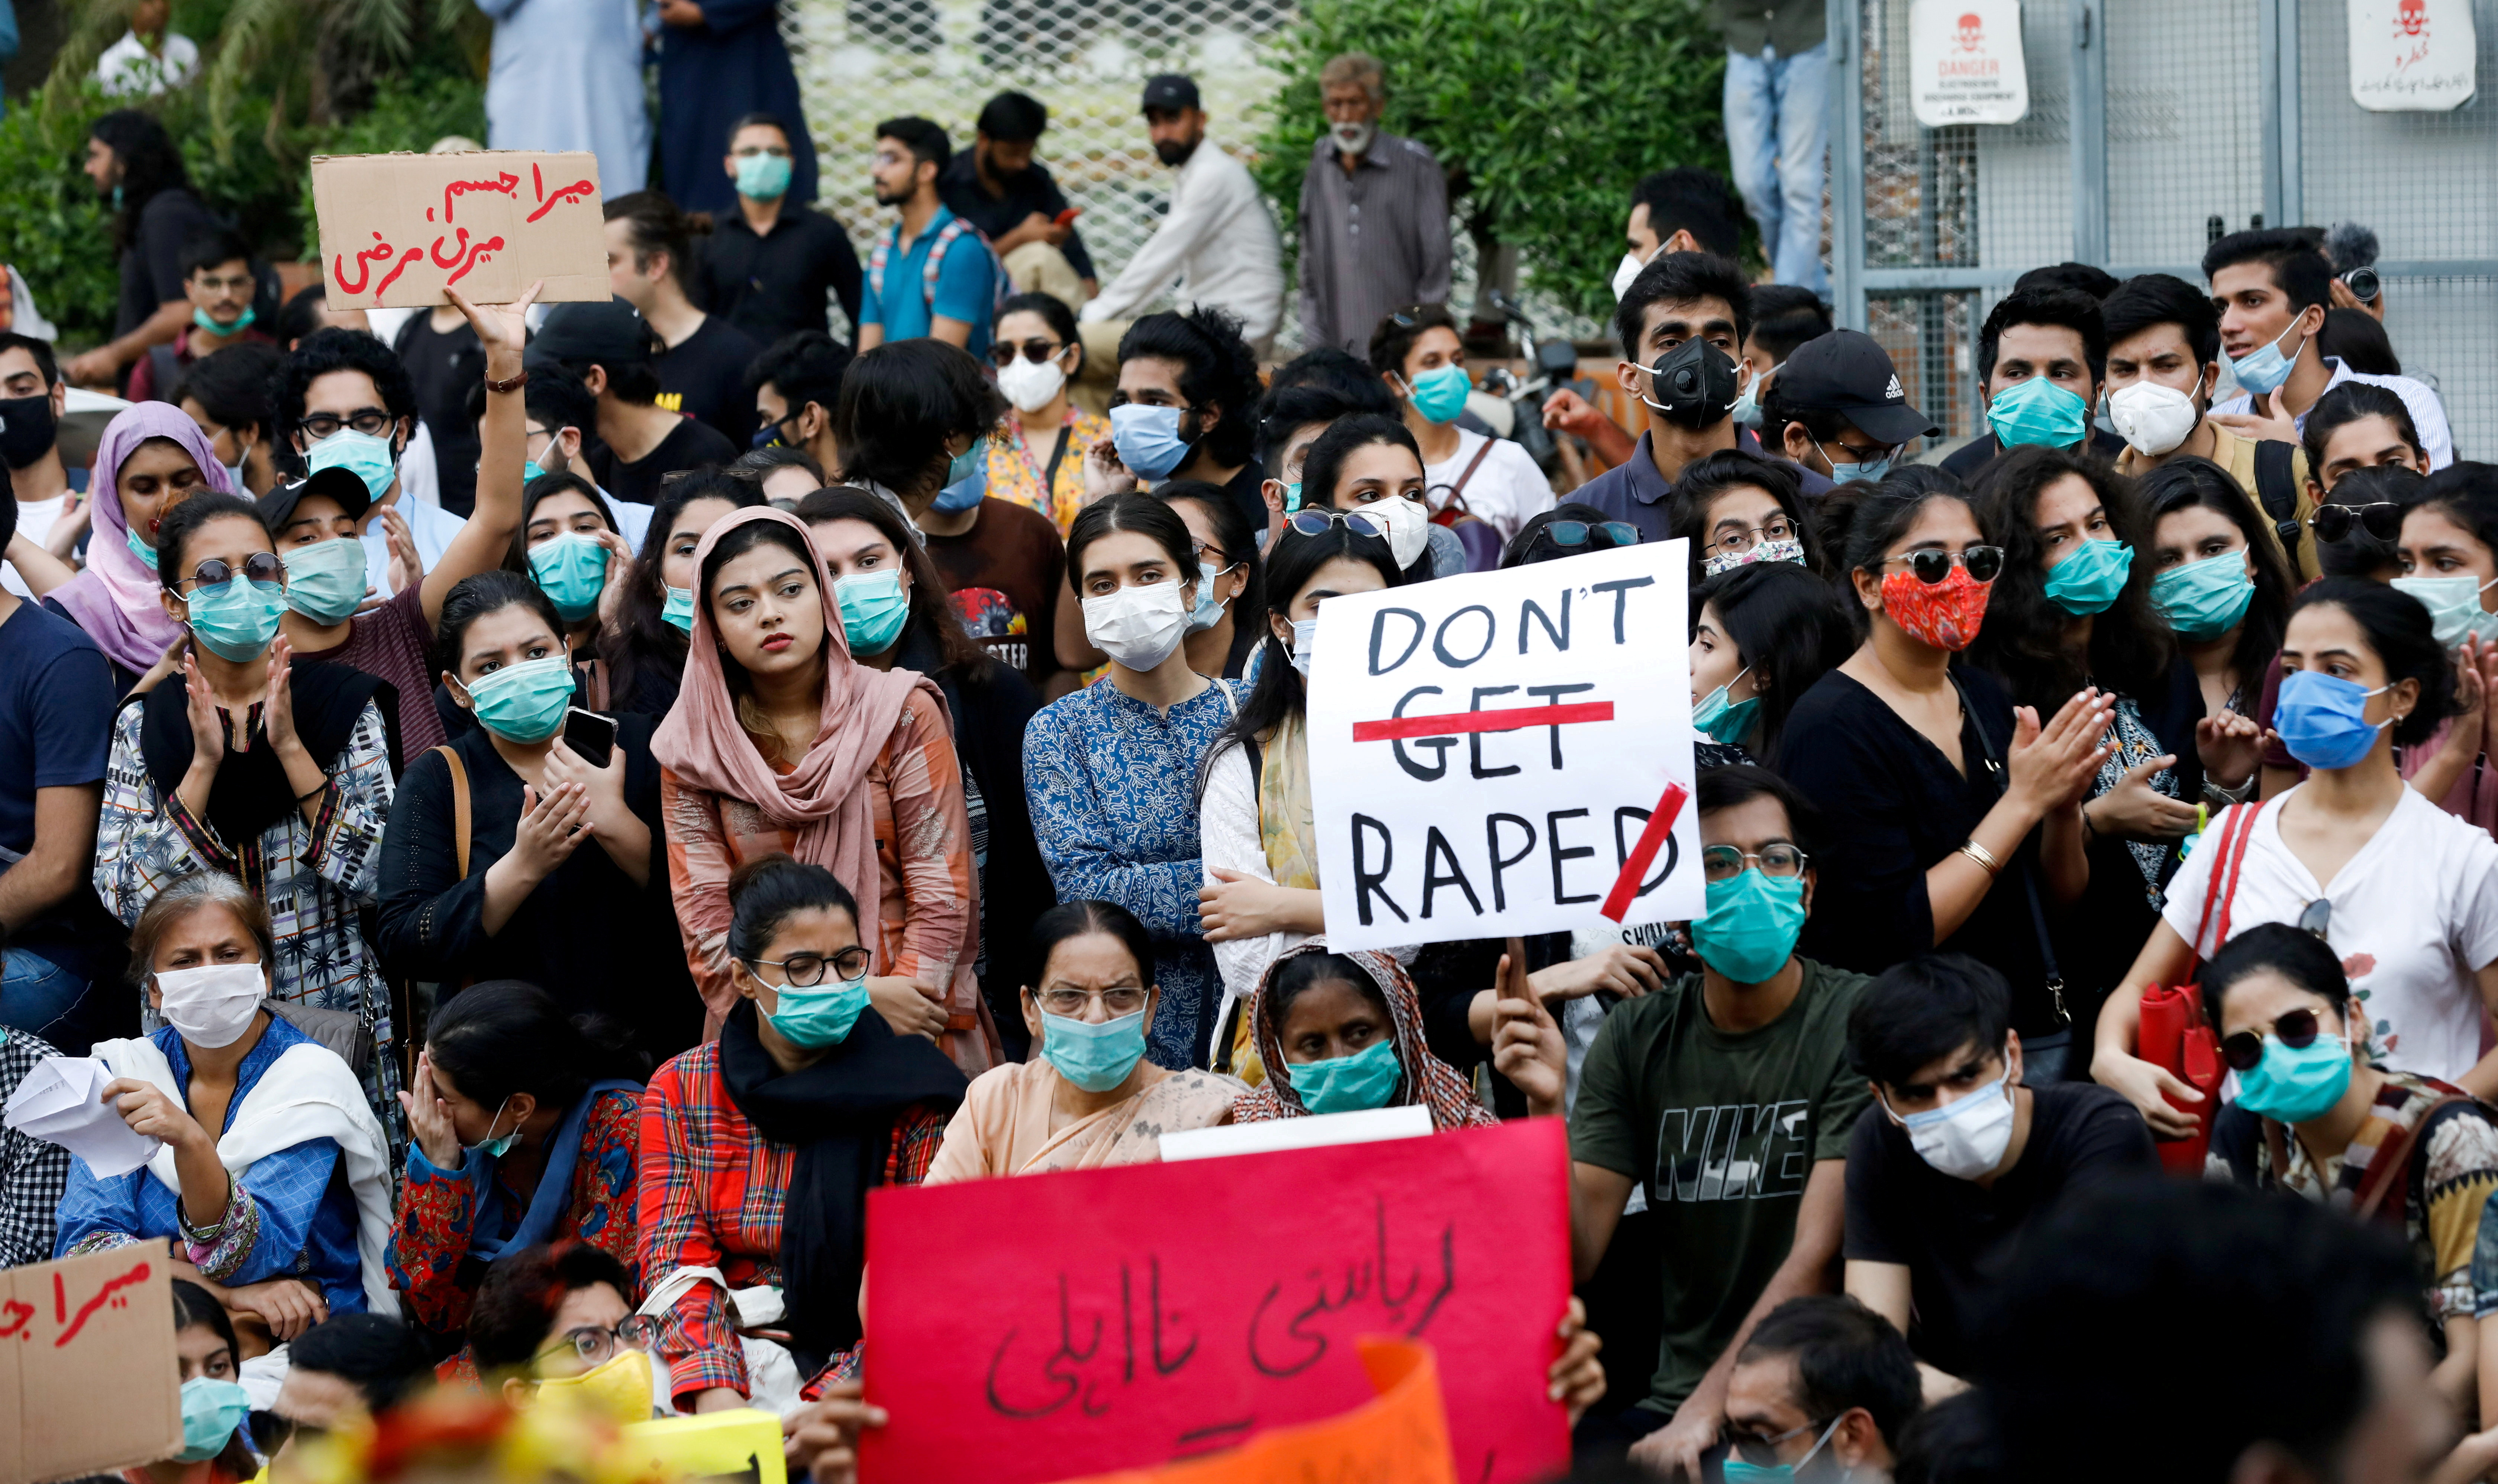 People carry signs to condemn violence against women and girls, during a protest in Karachi,